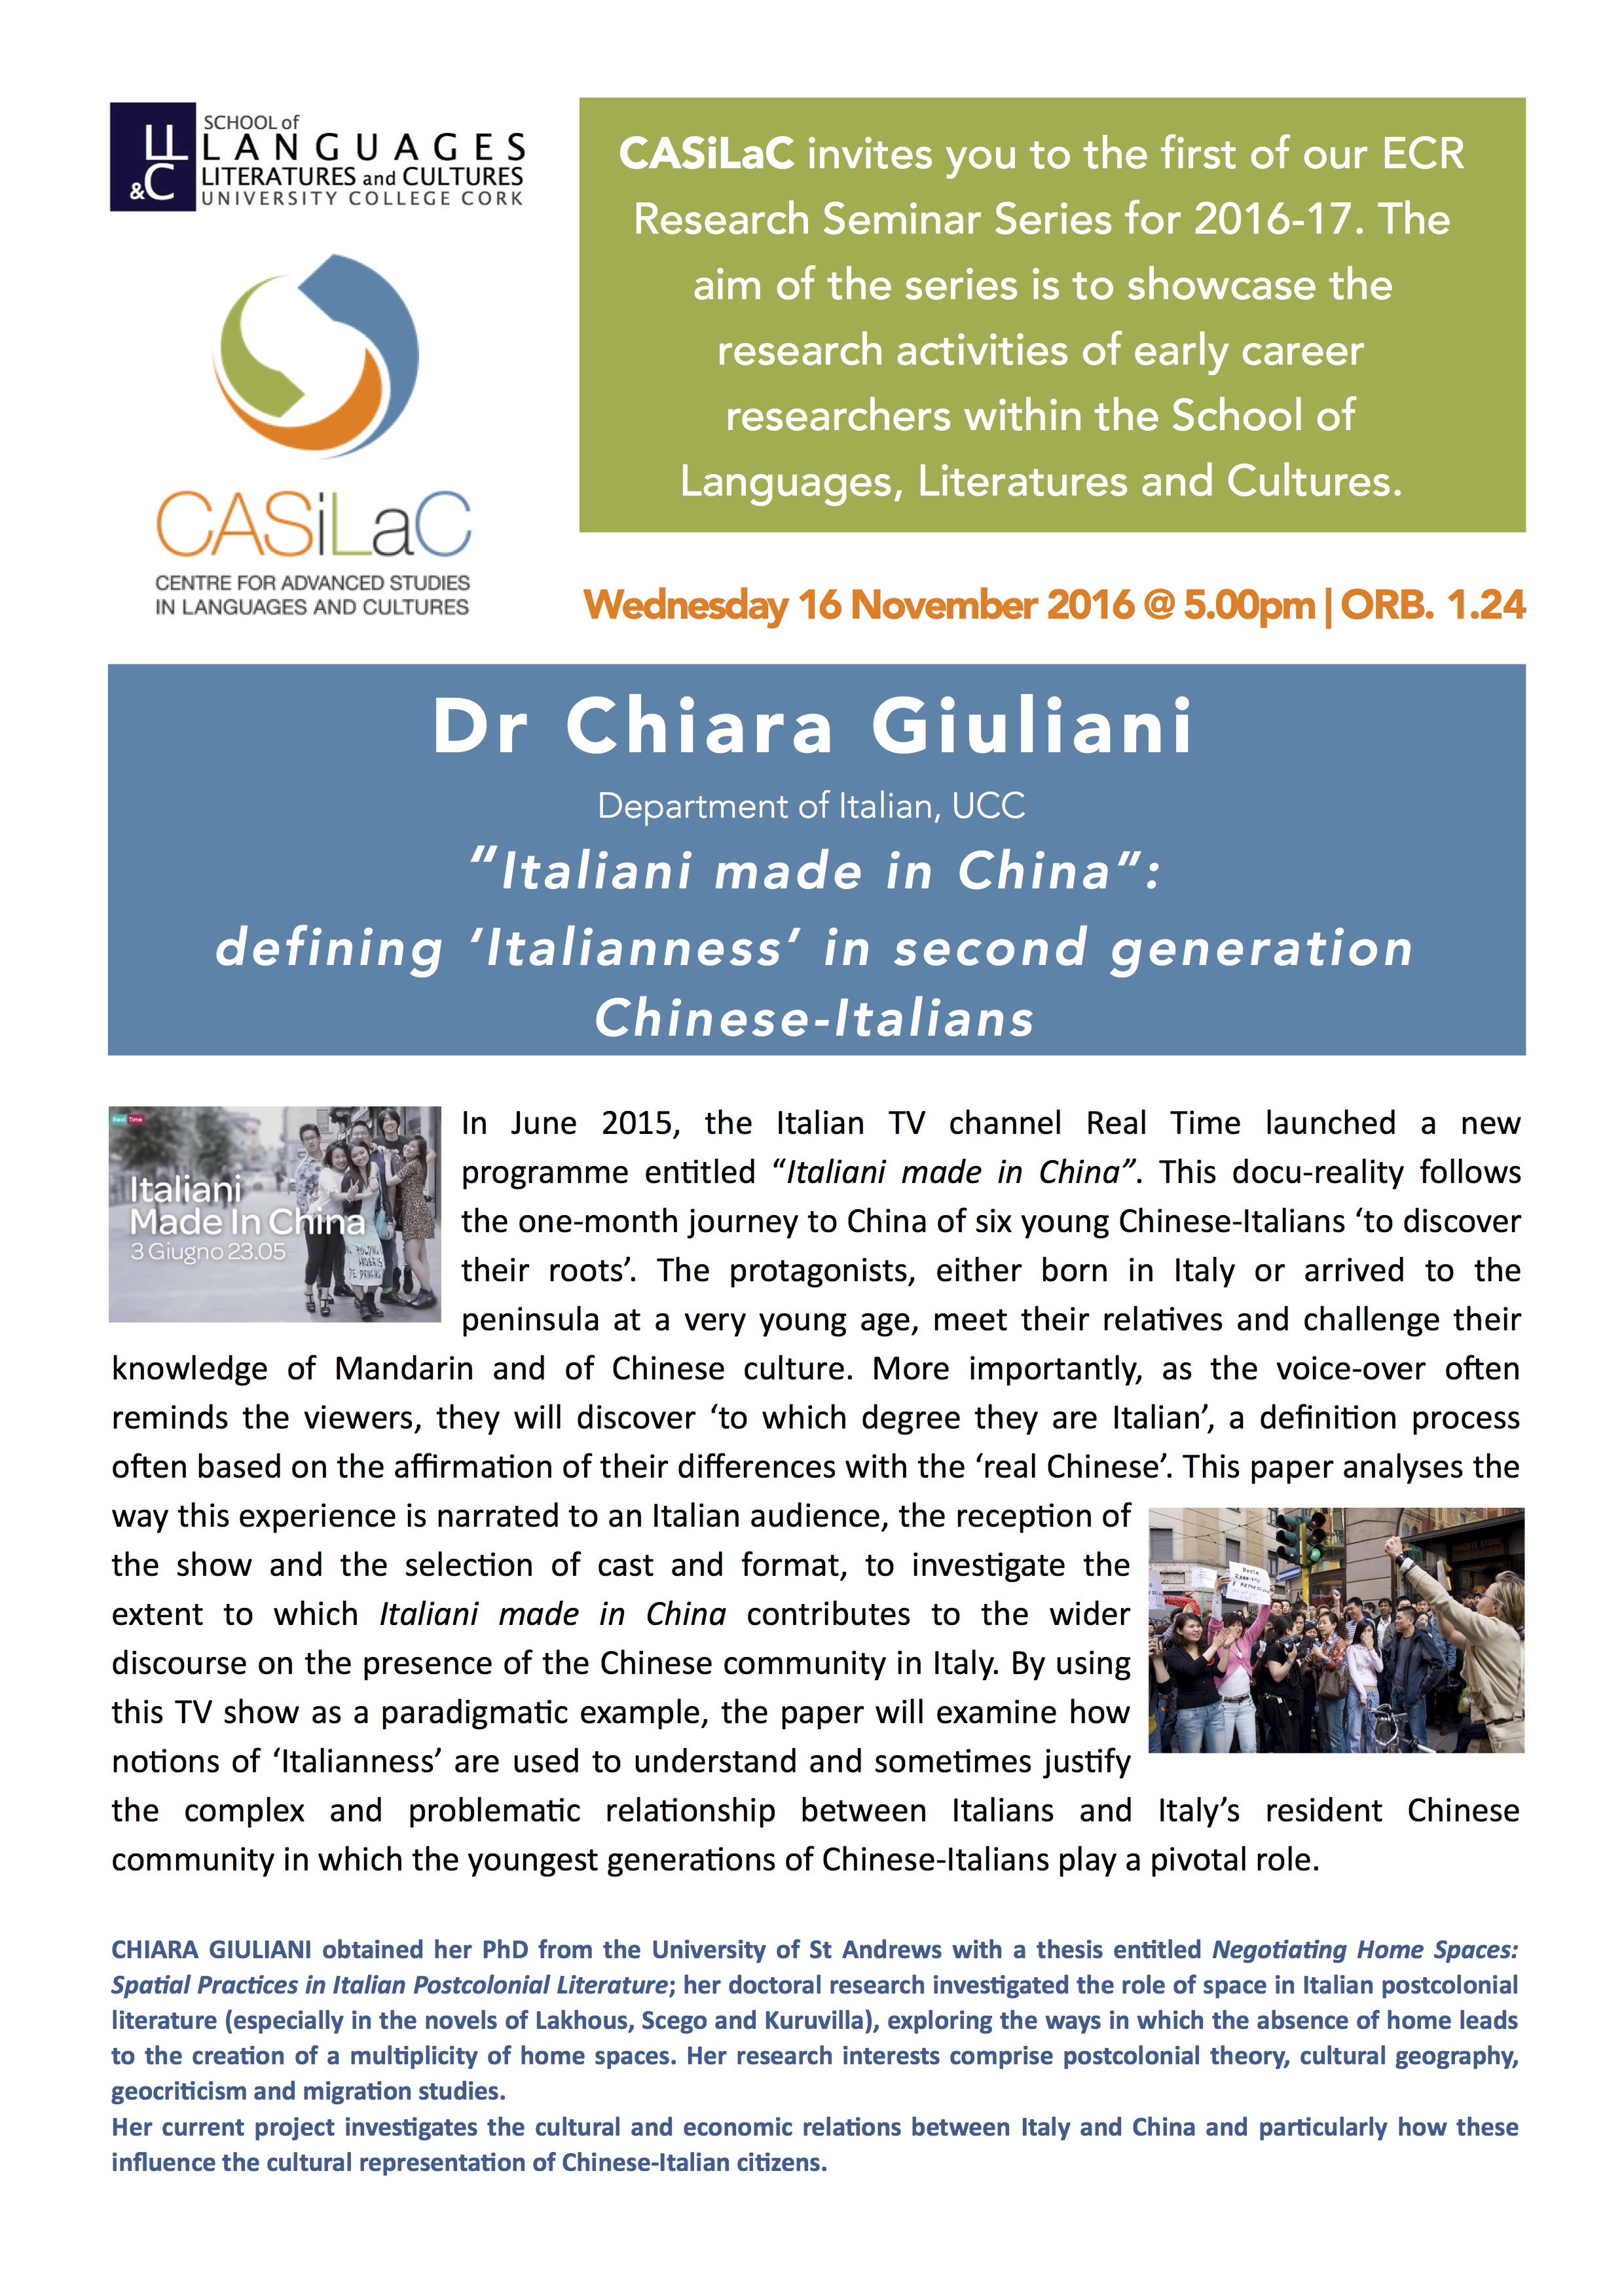 “Italiani made in China”: Defining ‘Italianness’ in second generation Chinese-Italians. by Dr CHIARA GIULIANI 
